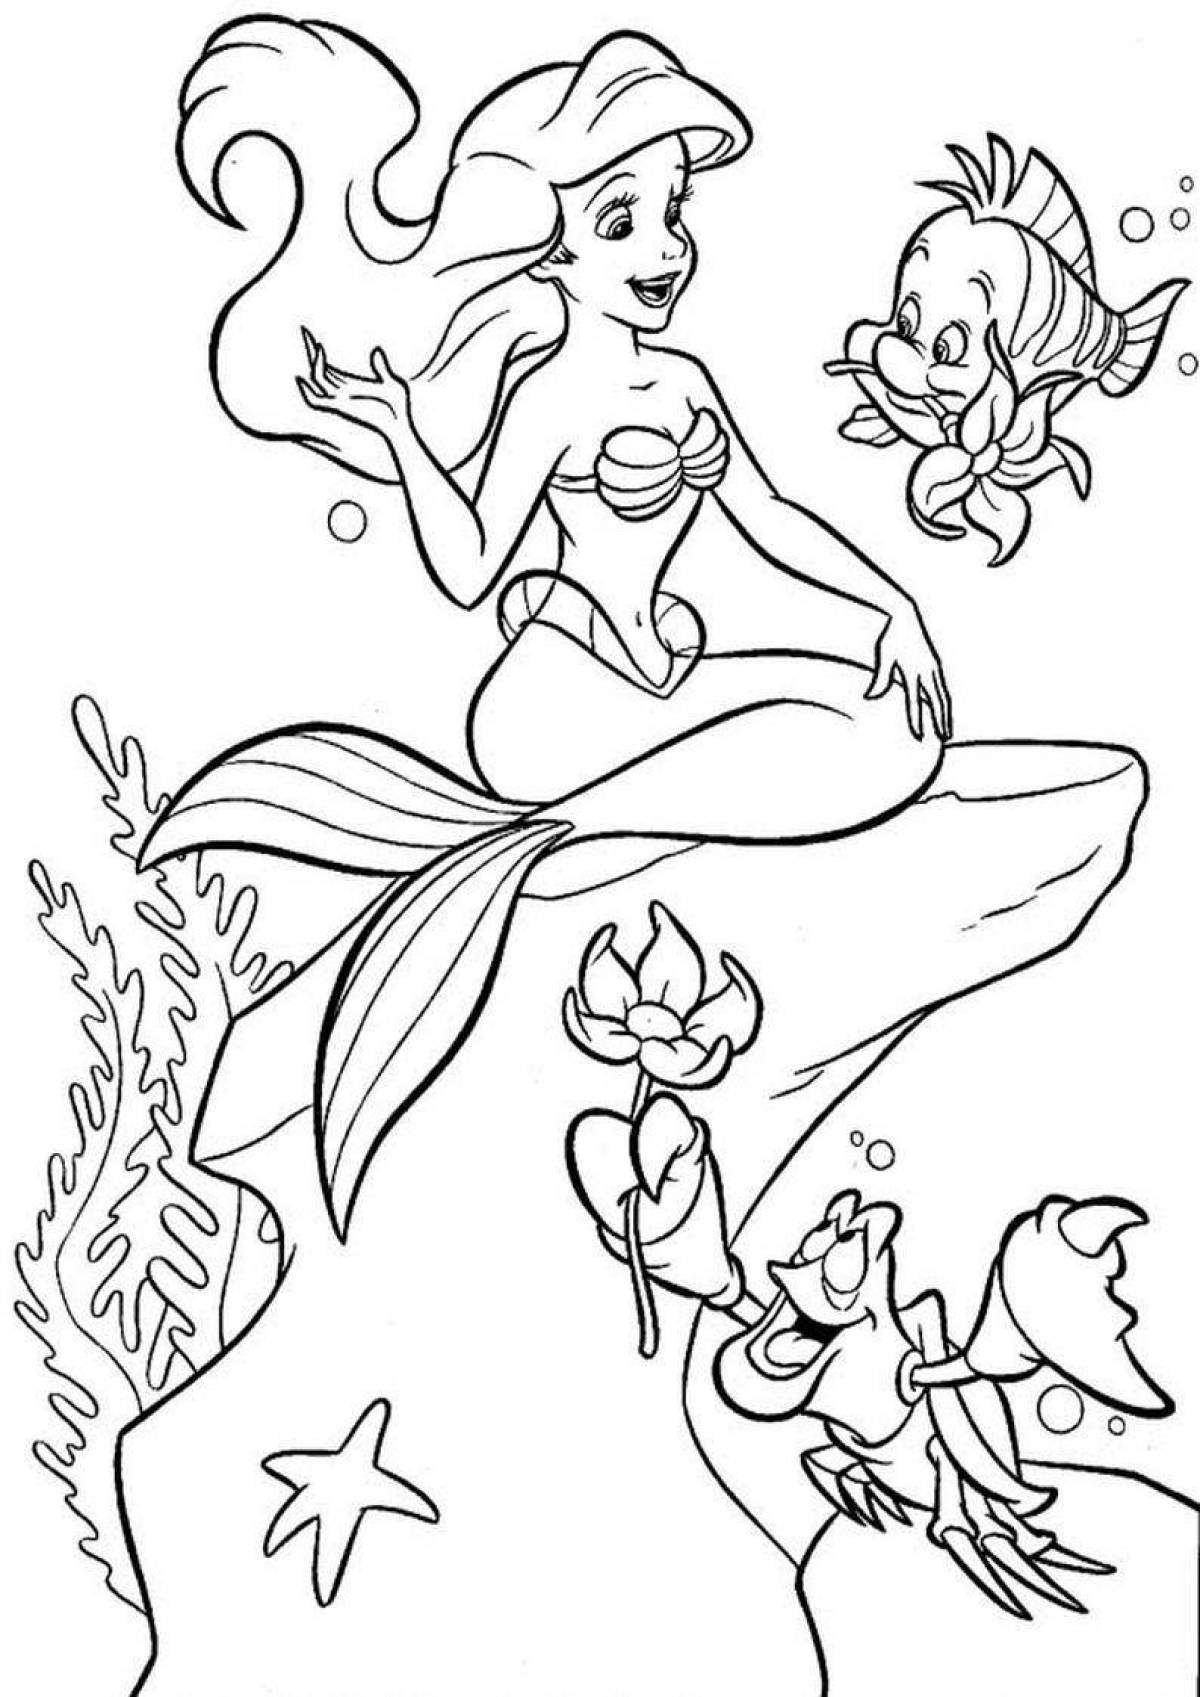 Adorable little mermaid coloring page